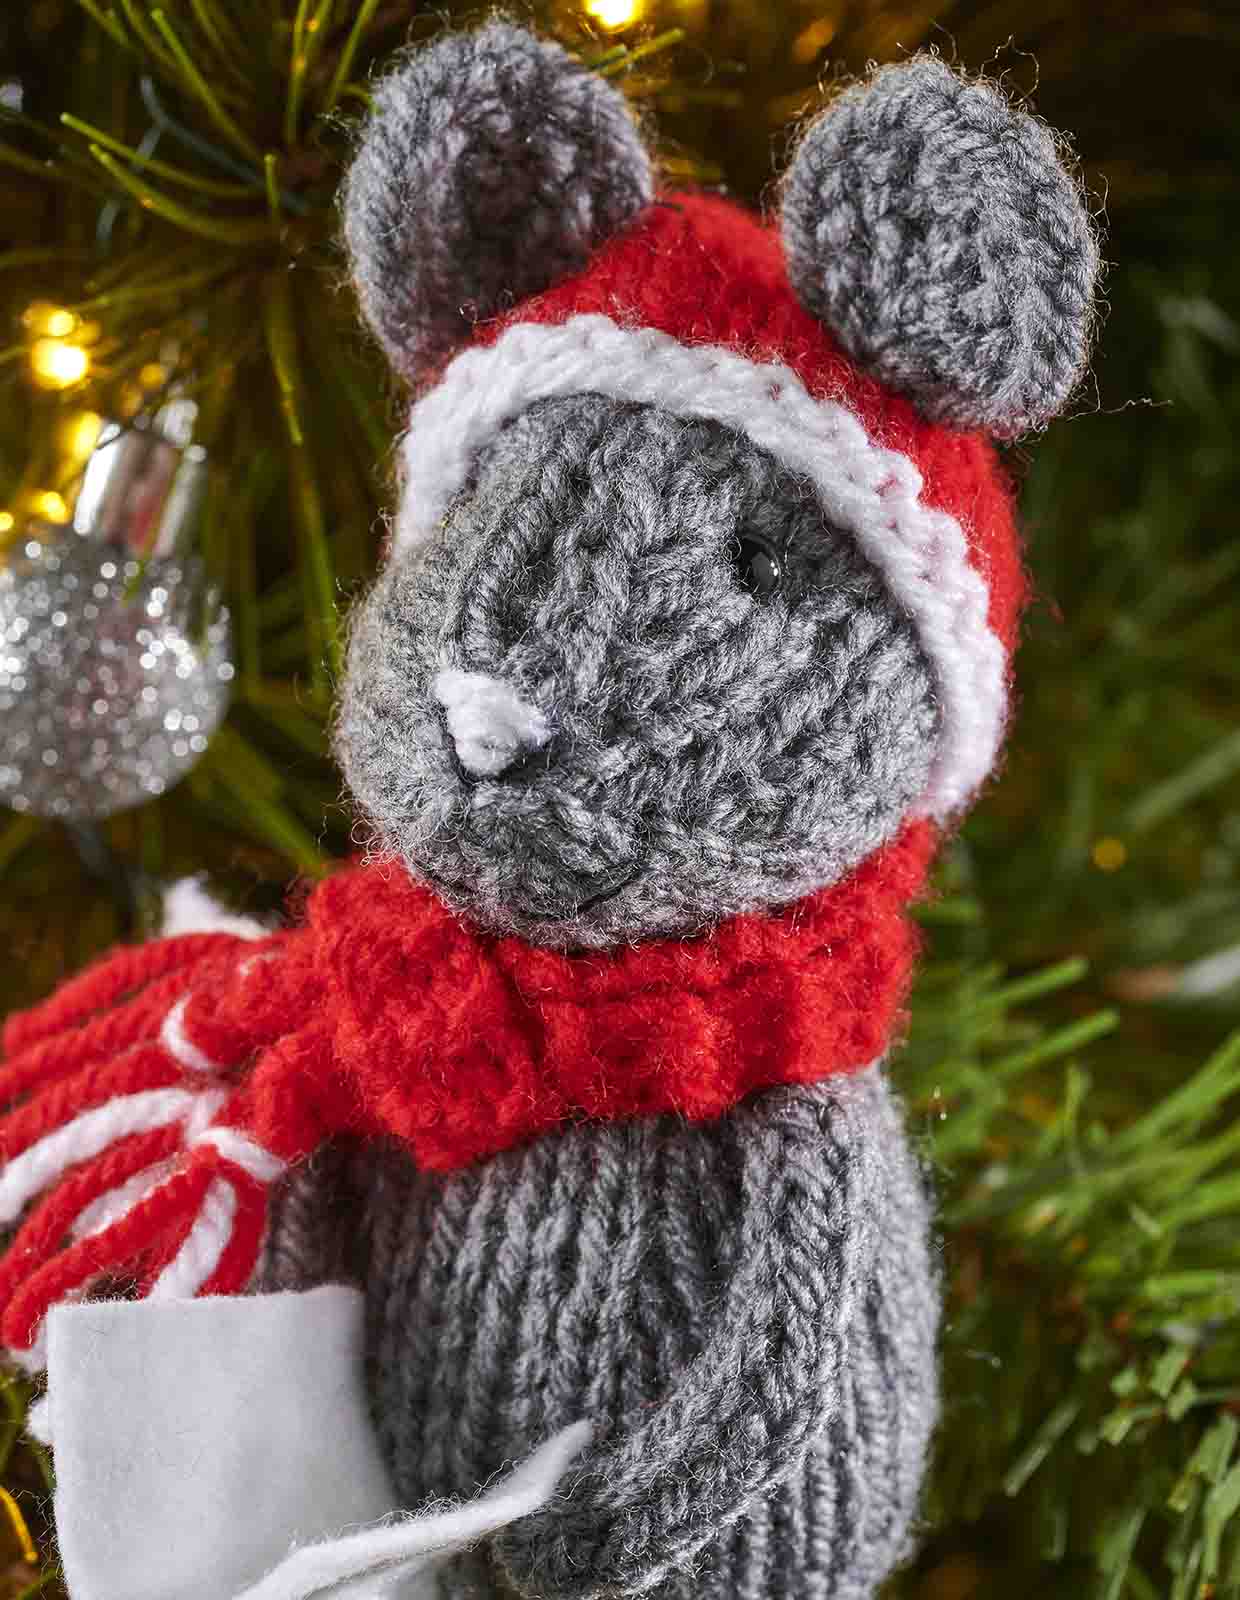 the sweet embroider face of the knitted carol singer mouse is seen close up, the mouse wear a red knitted hat and scarf and looks as thought it is smiling